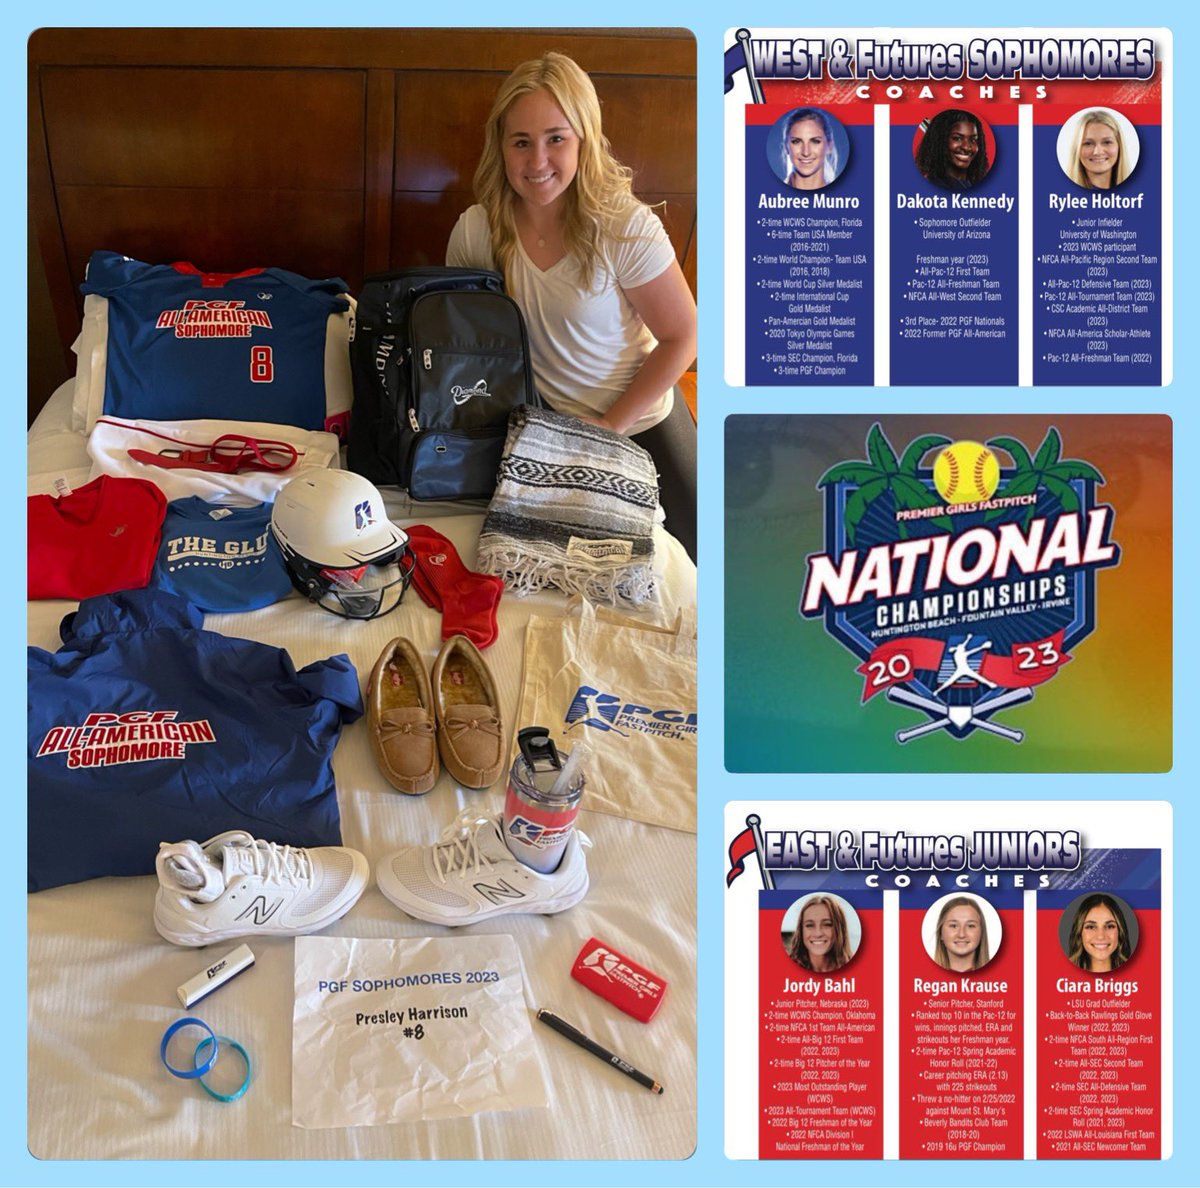 Thank you @PGFnetwork for selecting me to help represent  the 2025 Future⭐️’s. I ❤️the swag bag! Can’t wait to play Saturday with this awesome team & coaching staff! I’m grateful for this opportunity. #PGFAllAmerican #PGF2023 #playPGF @ExtraInningSB